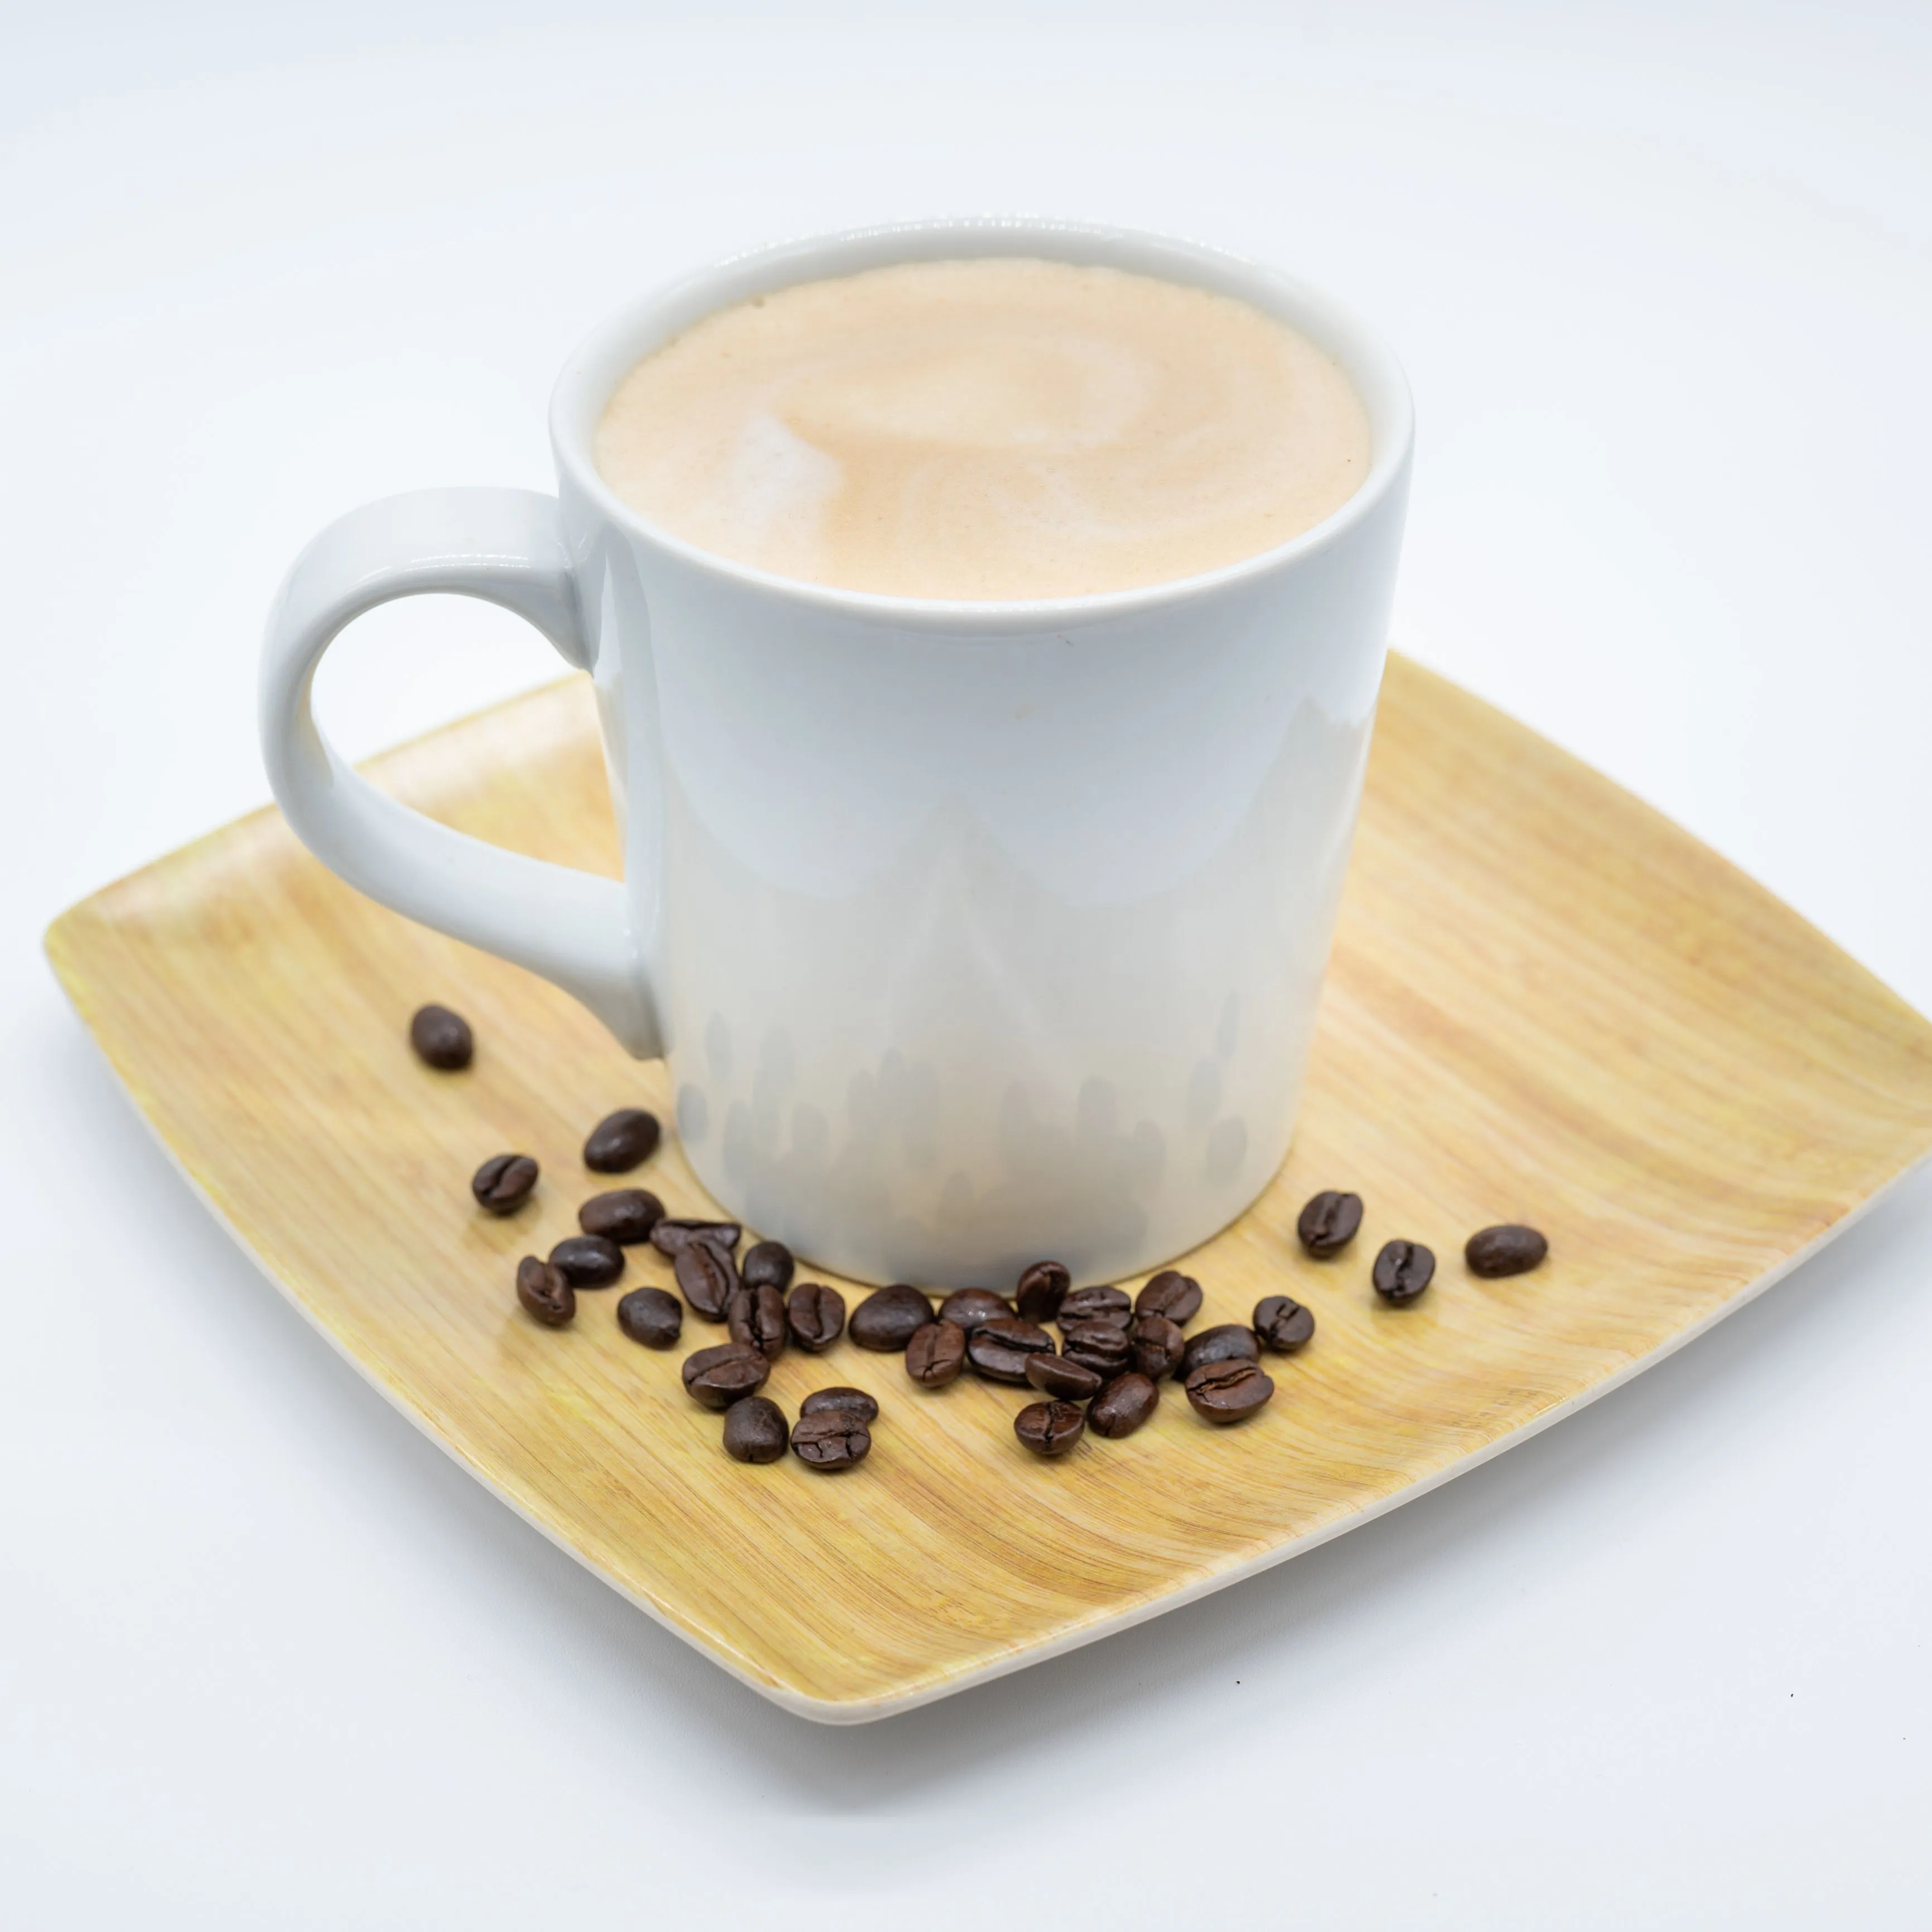 A cup of cappuccino on a wooden plate with scattered coffee beans beside it on a white background.